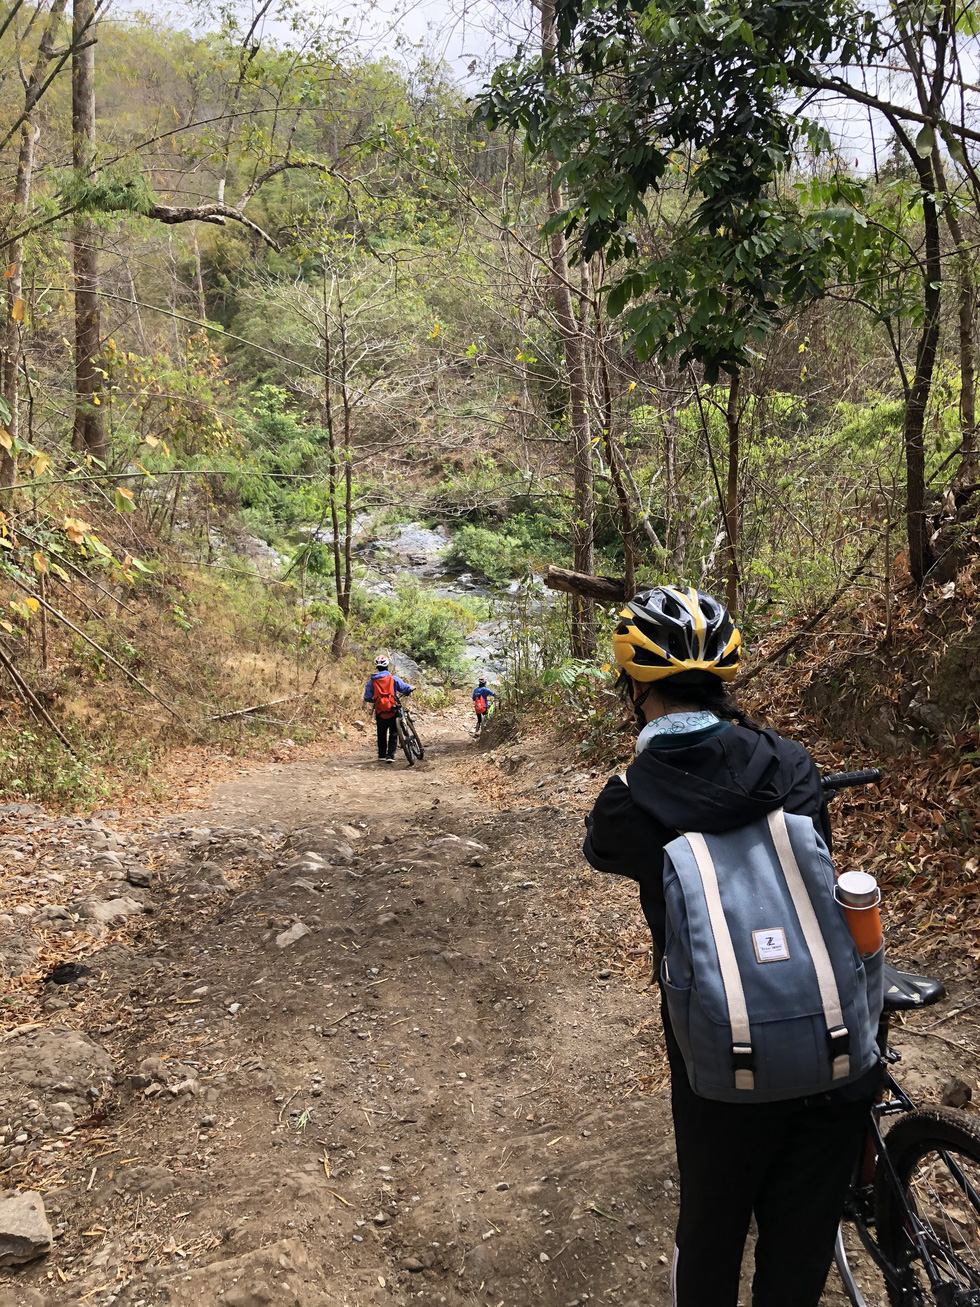 Trekking the route is not quite as difficult as cycling. Photo: Vi Thich / Handout via Tuoi Tre